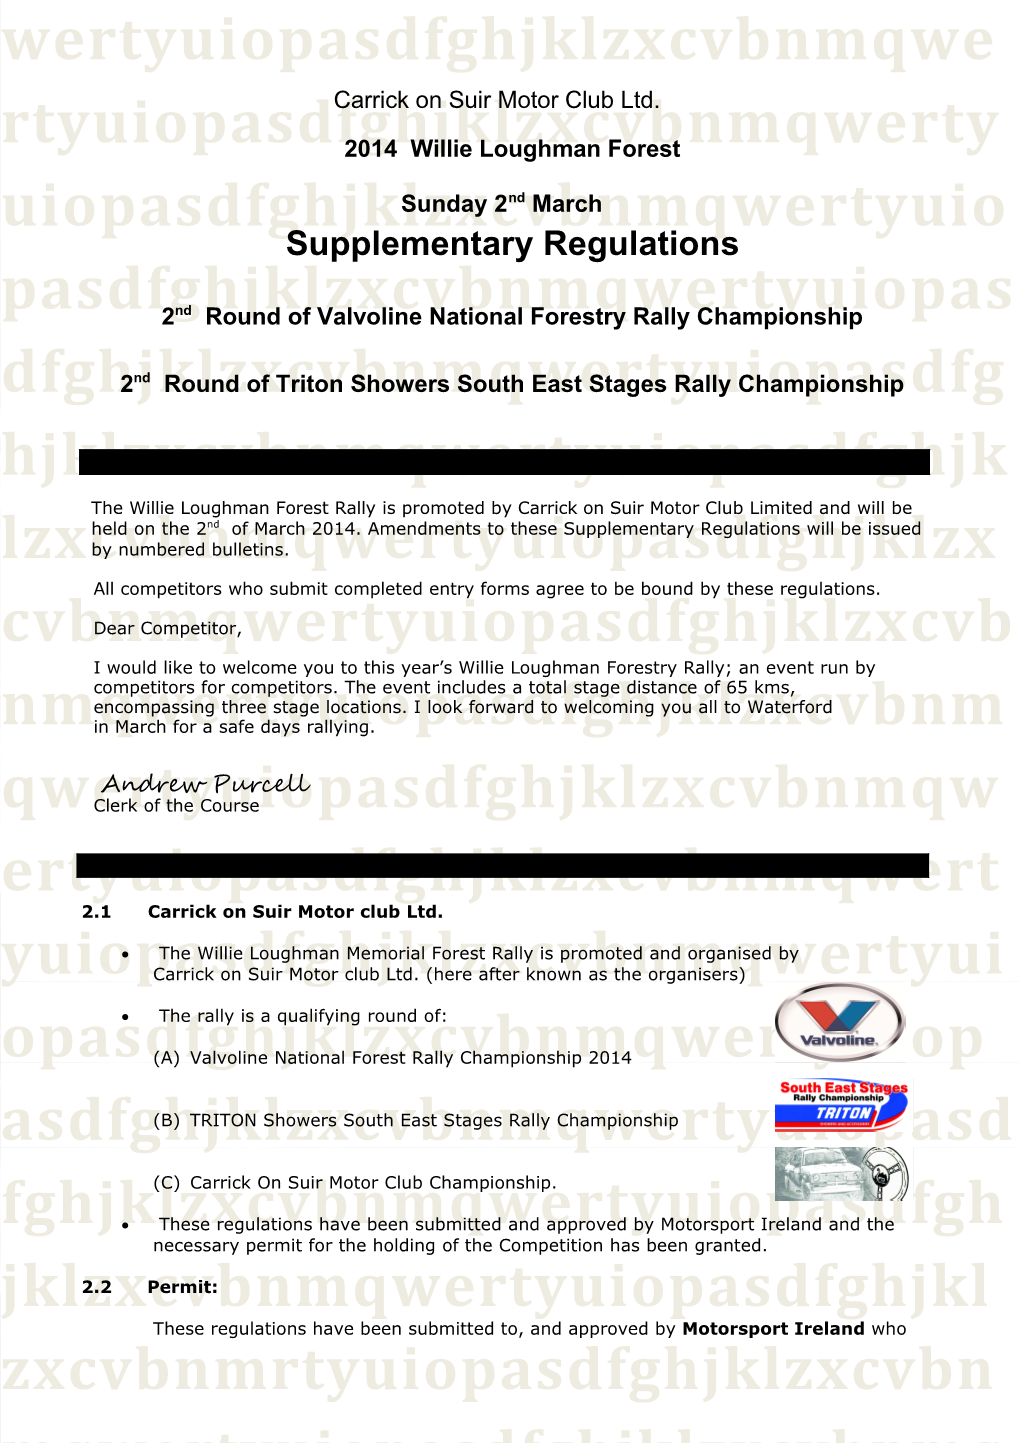 Willie Loughman Forest Rally 2013 Supplementary Regulations